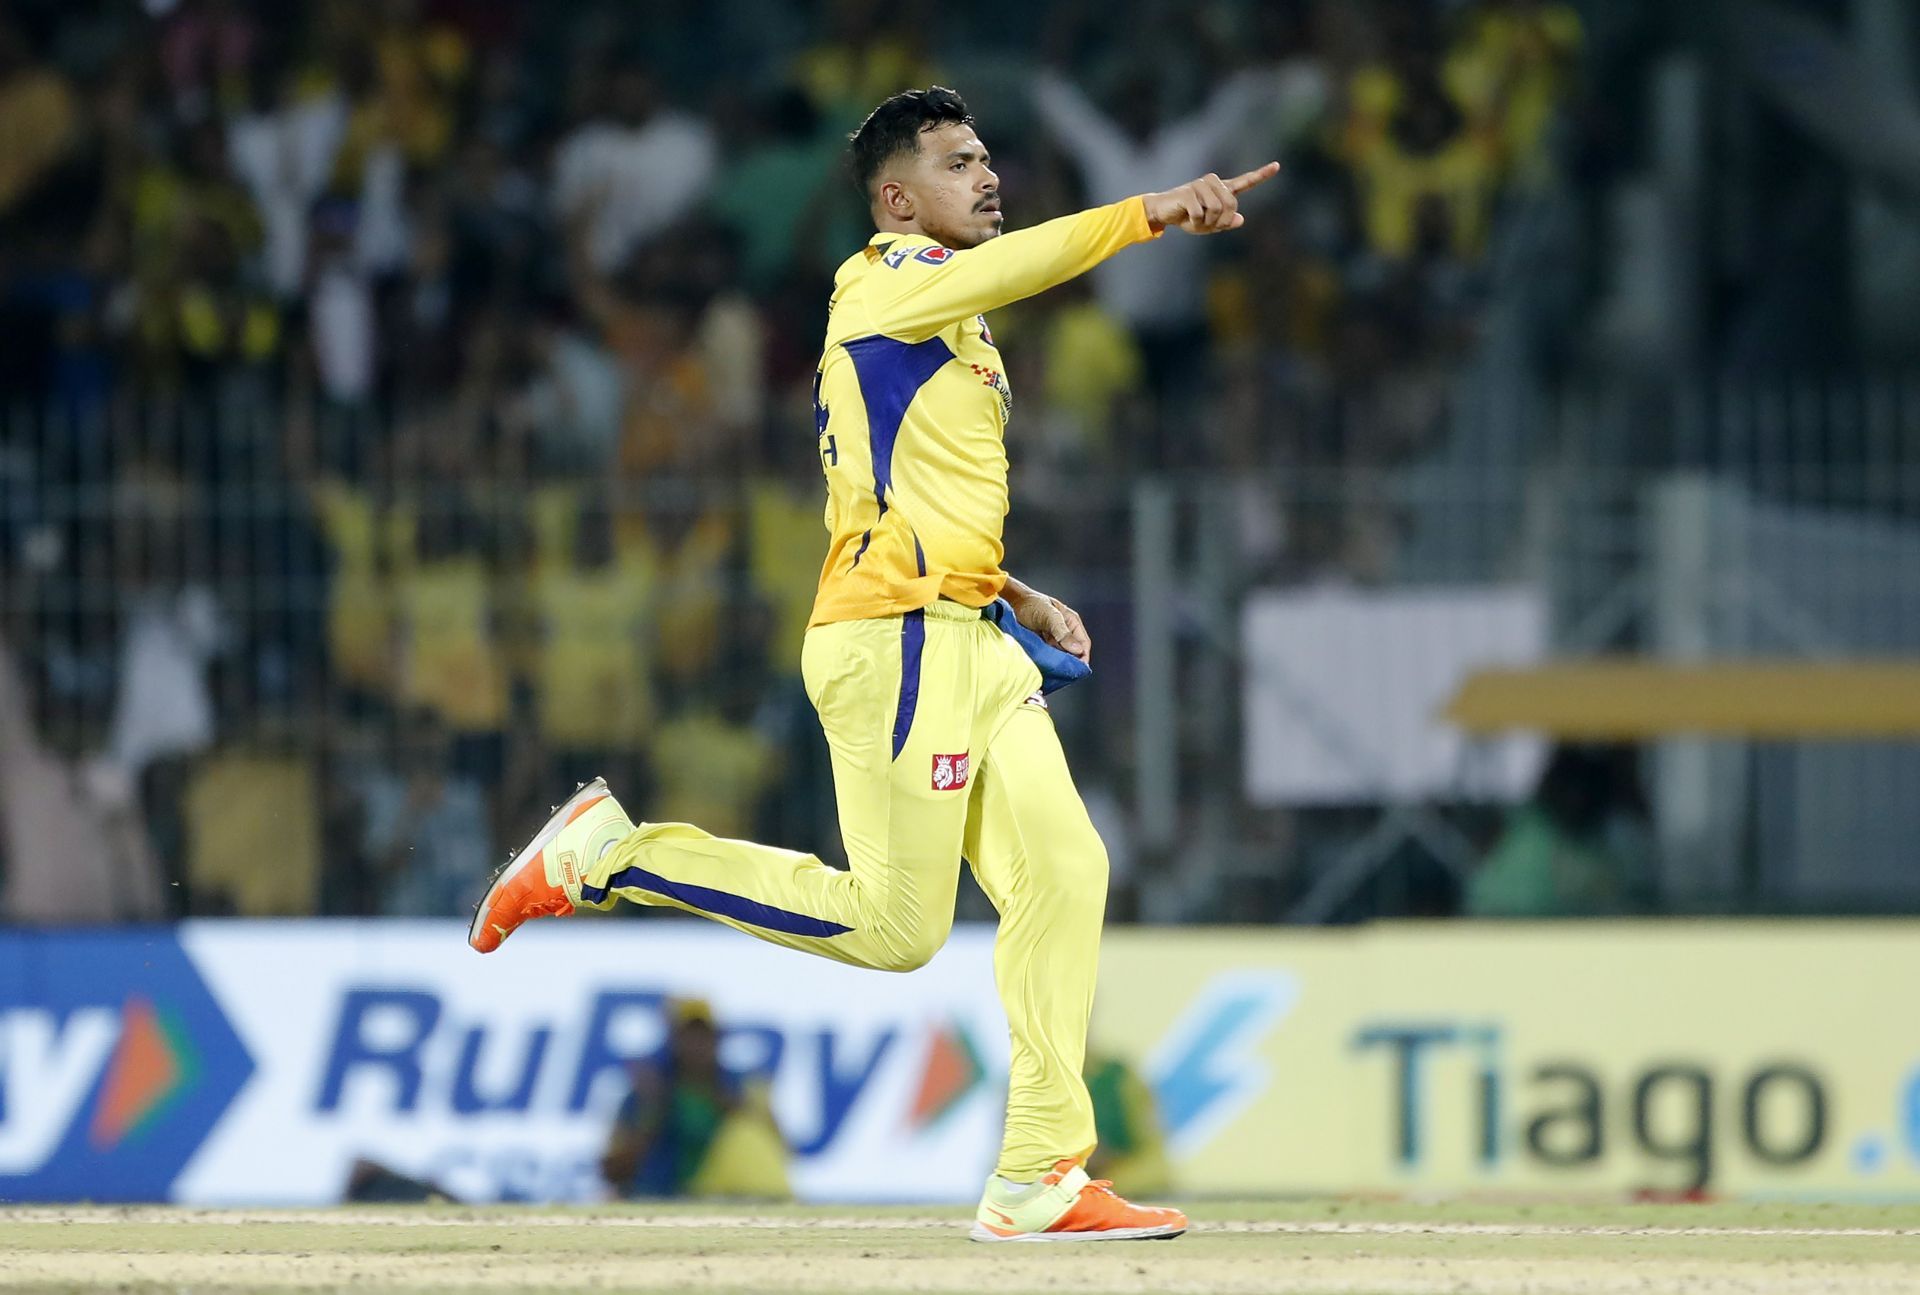 Theekshana&#039;s wicket-taking ability at different stages has been pivotal in CSK&#039;s wins.